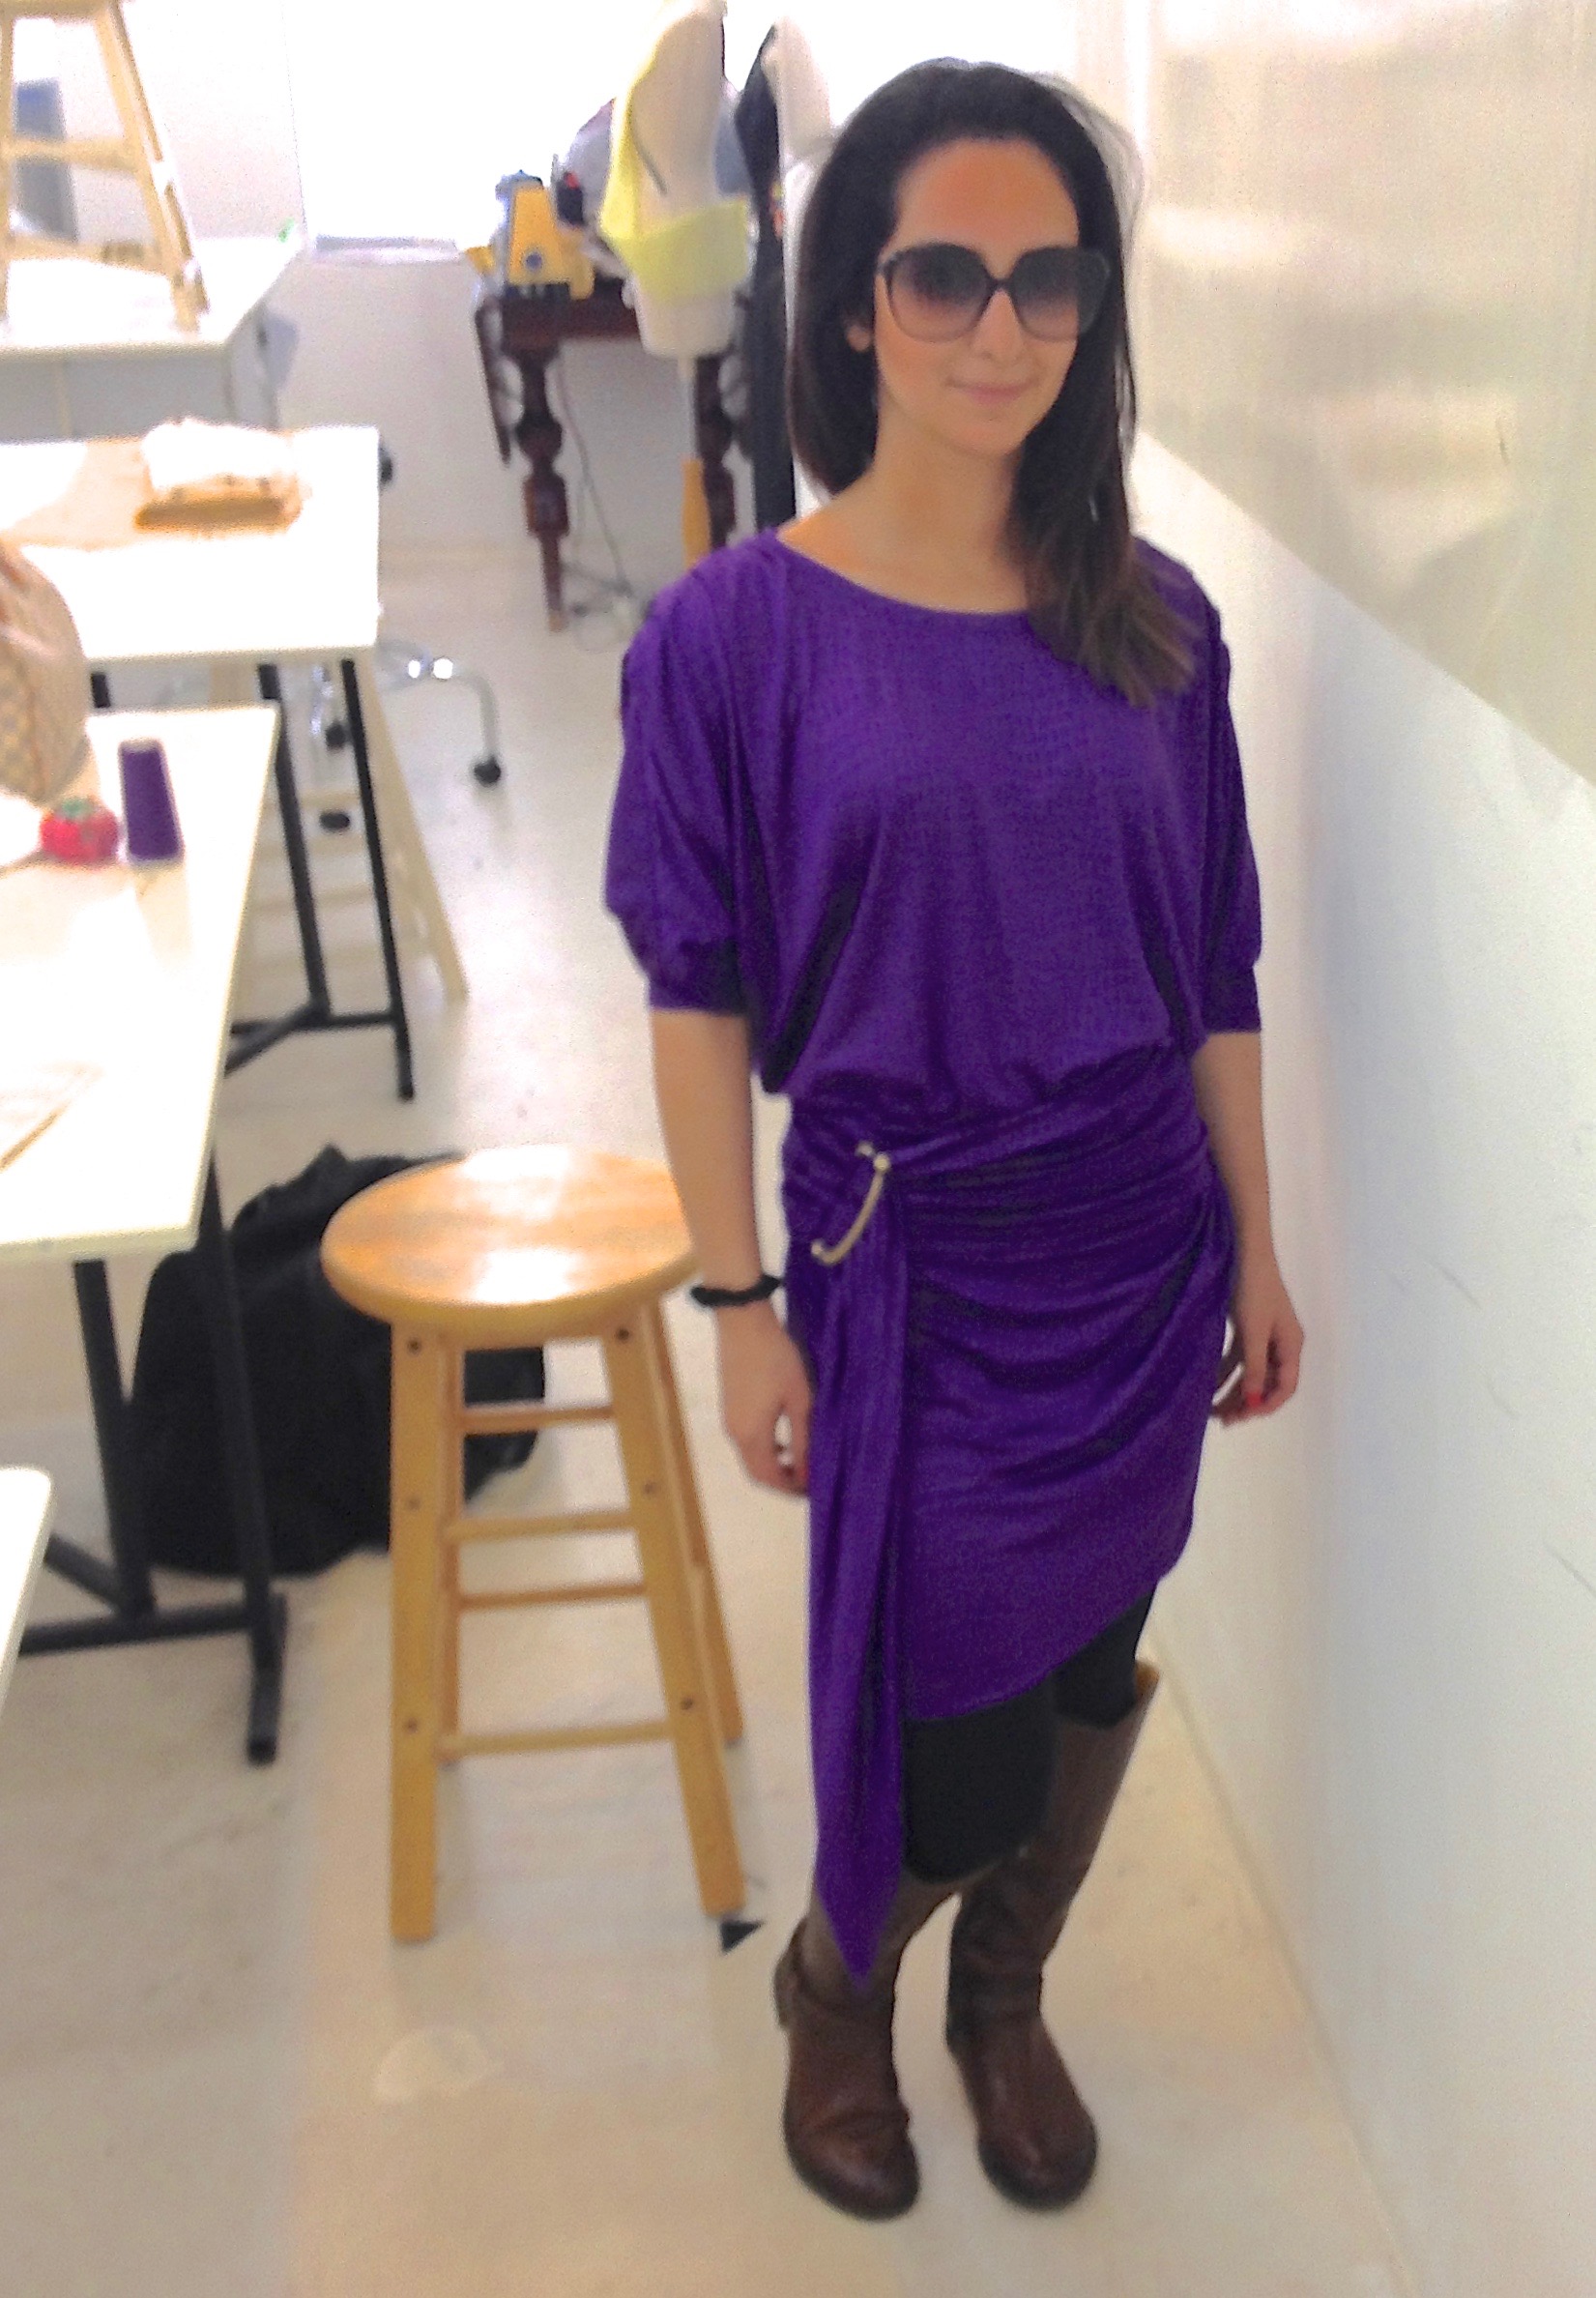 Sewing classes in chicago: tchad: workroom: studio: maddie: Vogue 1337: purple knit: full front 2